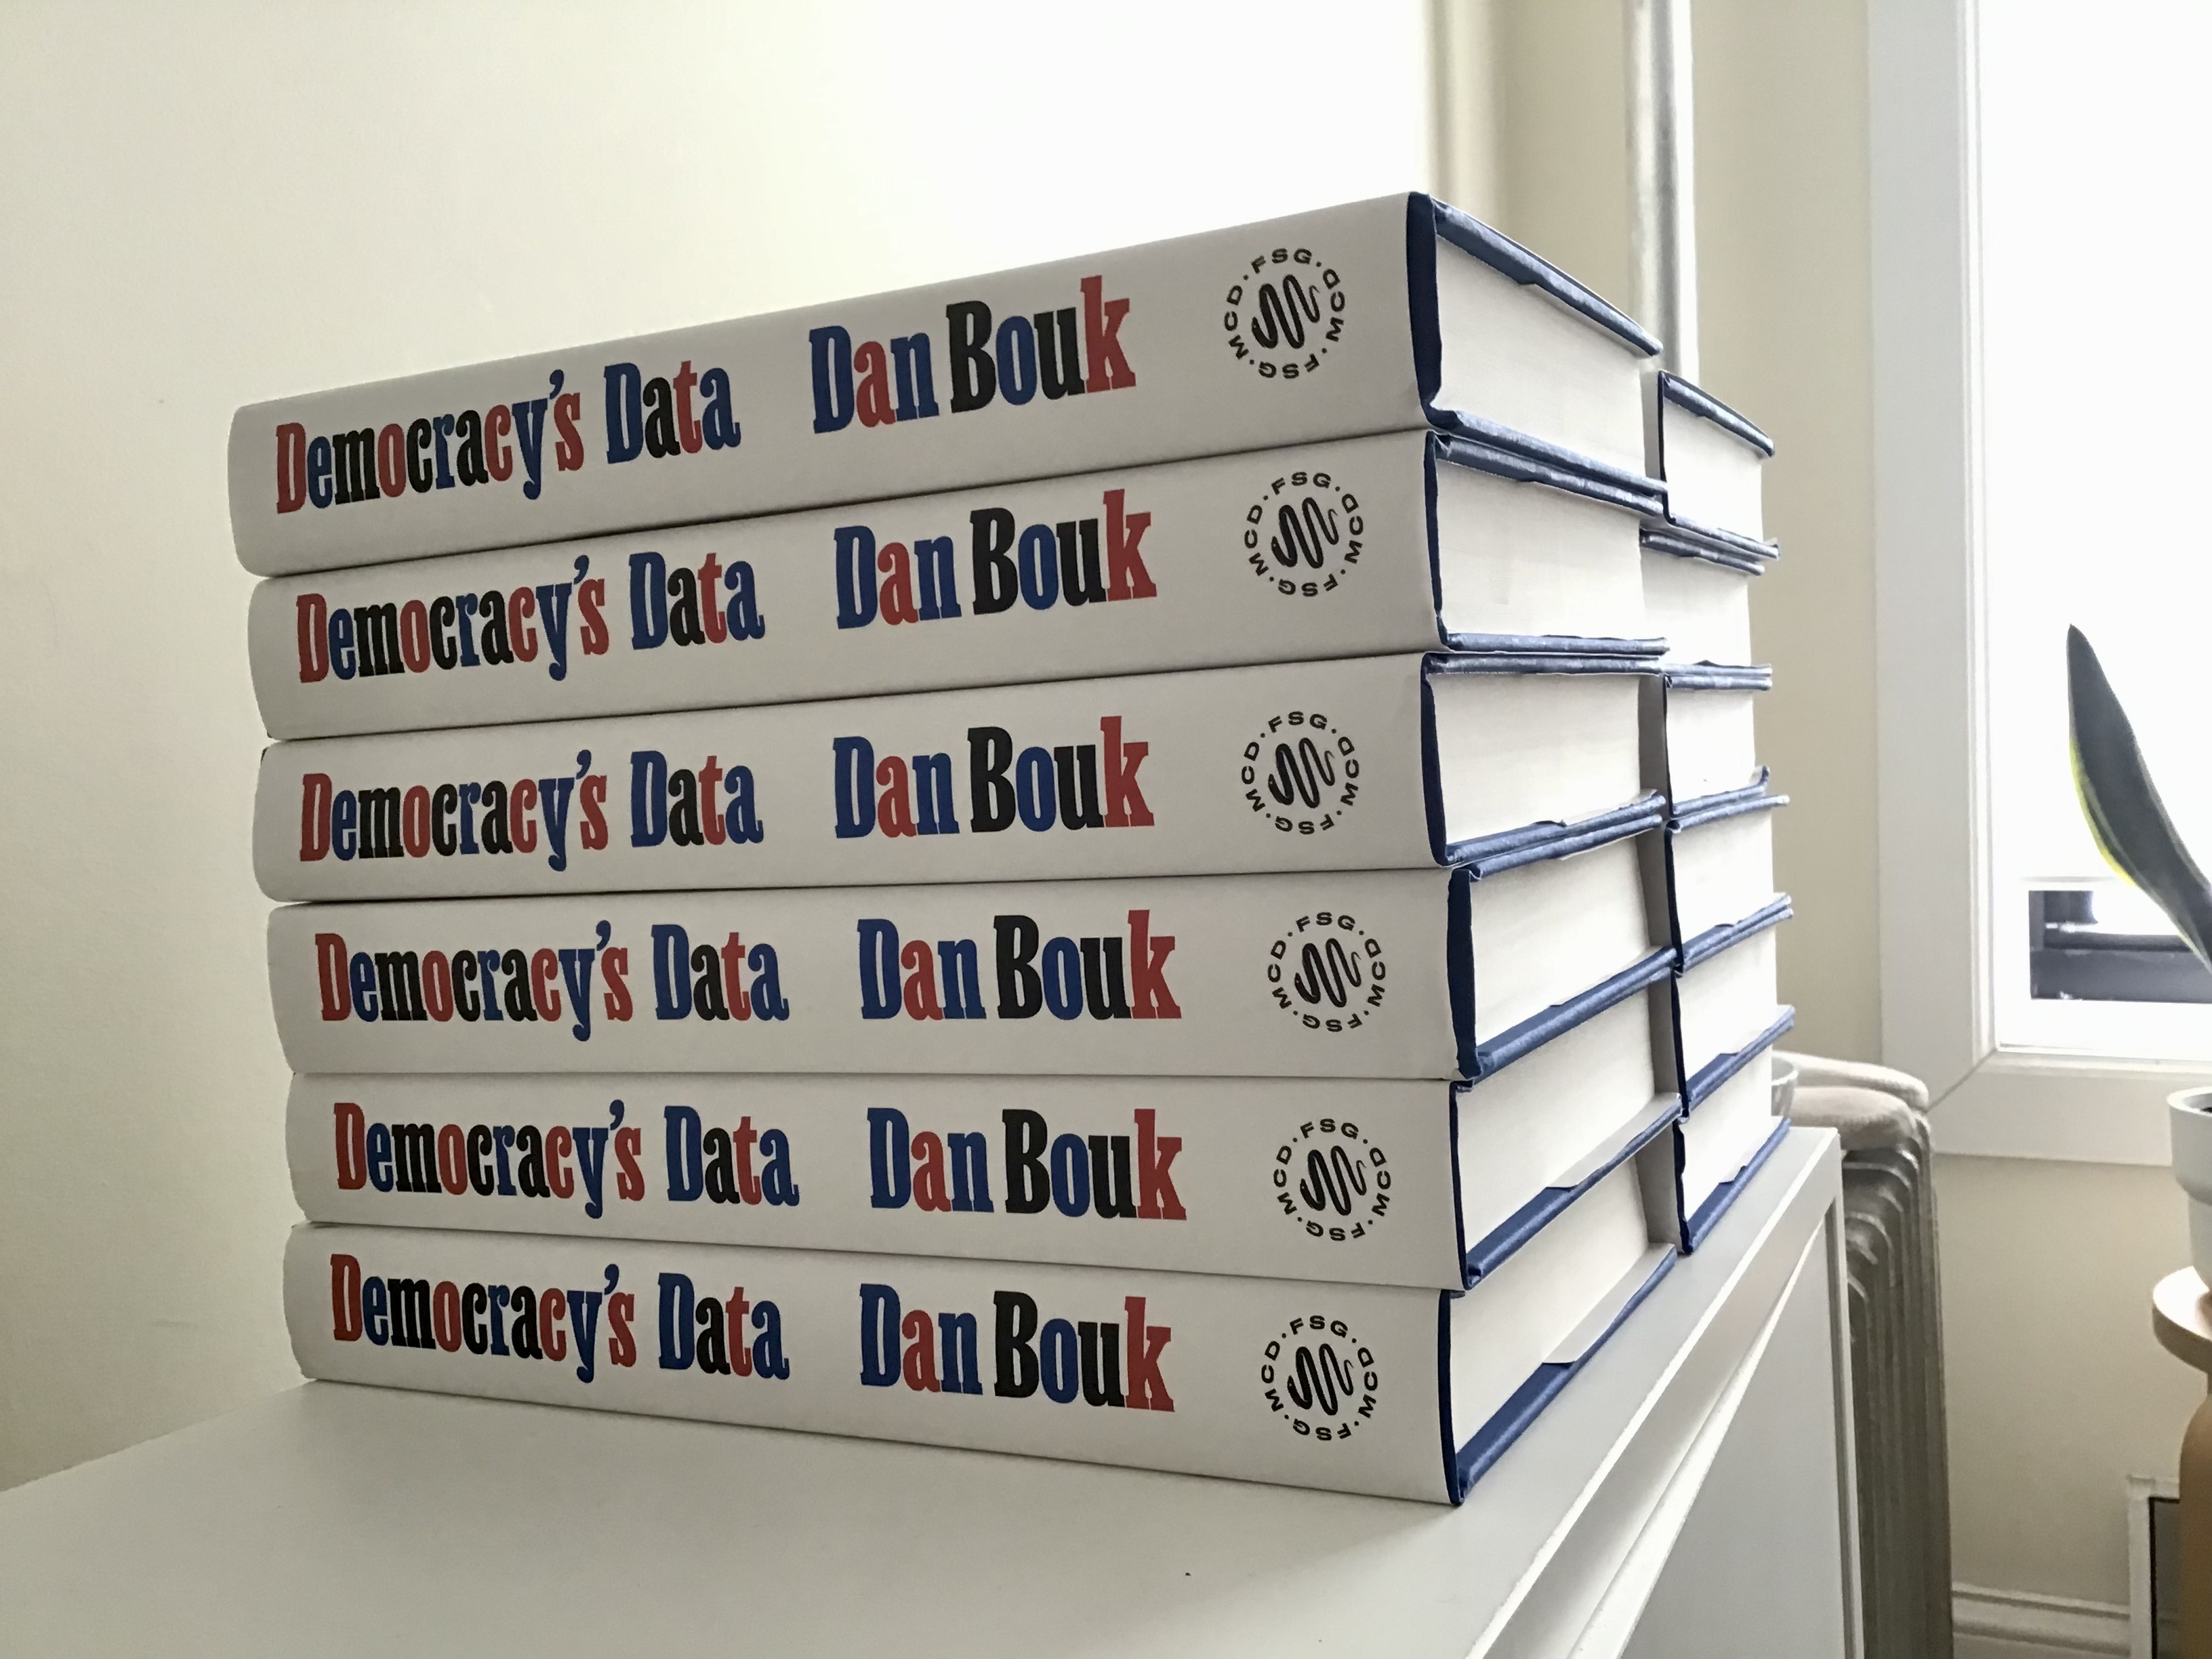 A stack of books lay on their sides, each bearing the title Democracy's Data by Dan Bouk.